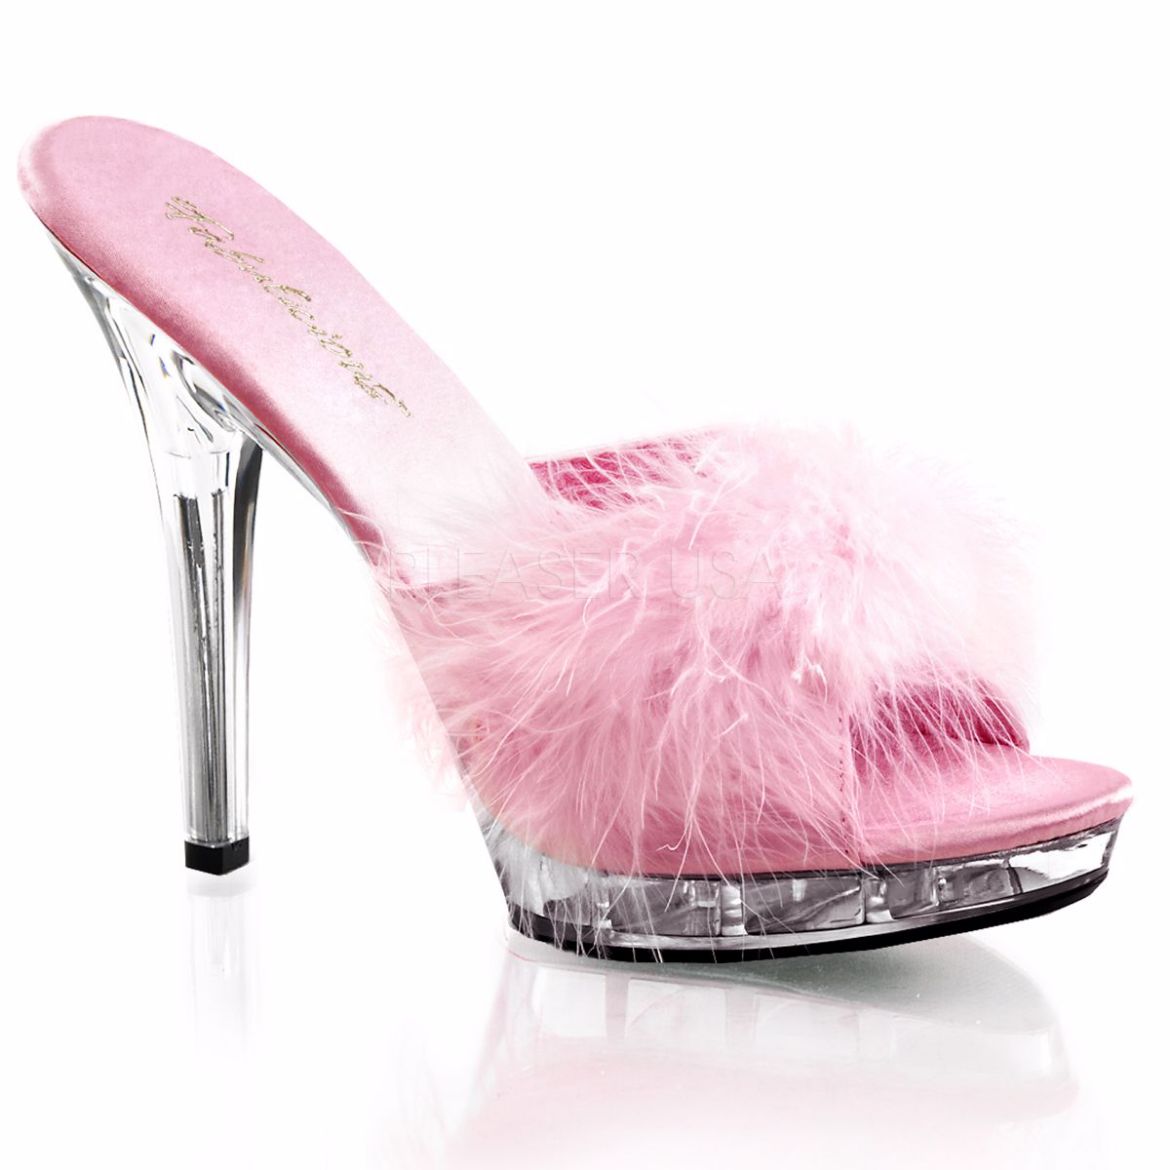 Product image of Fabulicious Lip-101-8 Baby Pink Satin-Fur/Clear, 5 inch (12.7 cm) Heel, 3/4 inch (1.9 cm) Platform Slide Mule Shoes